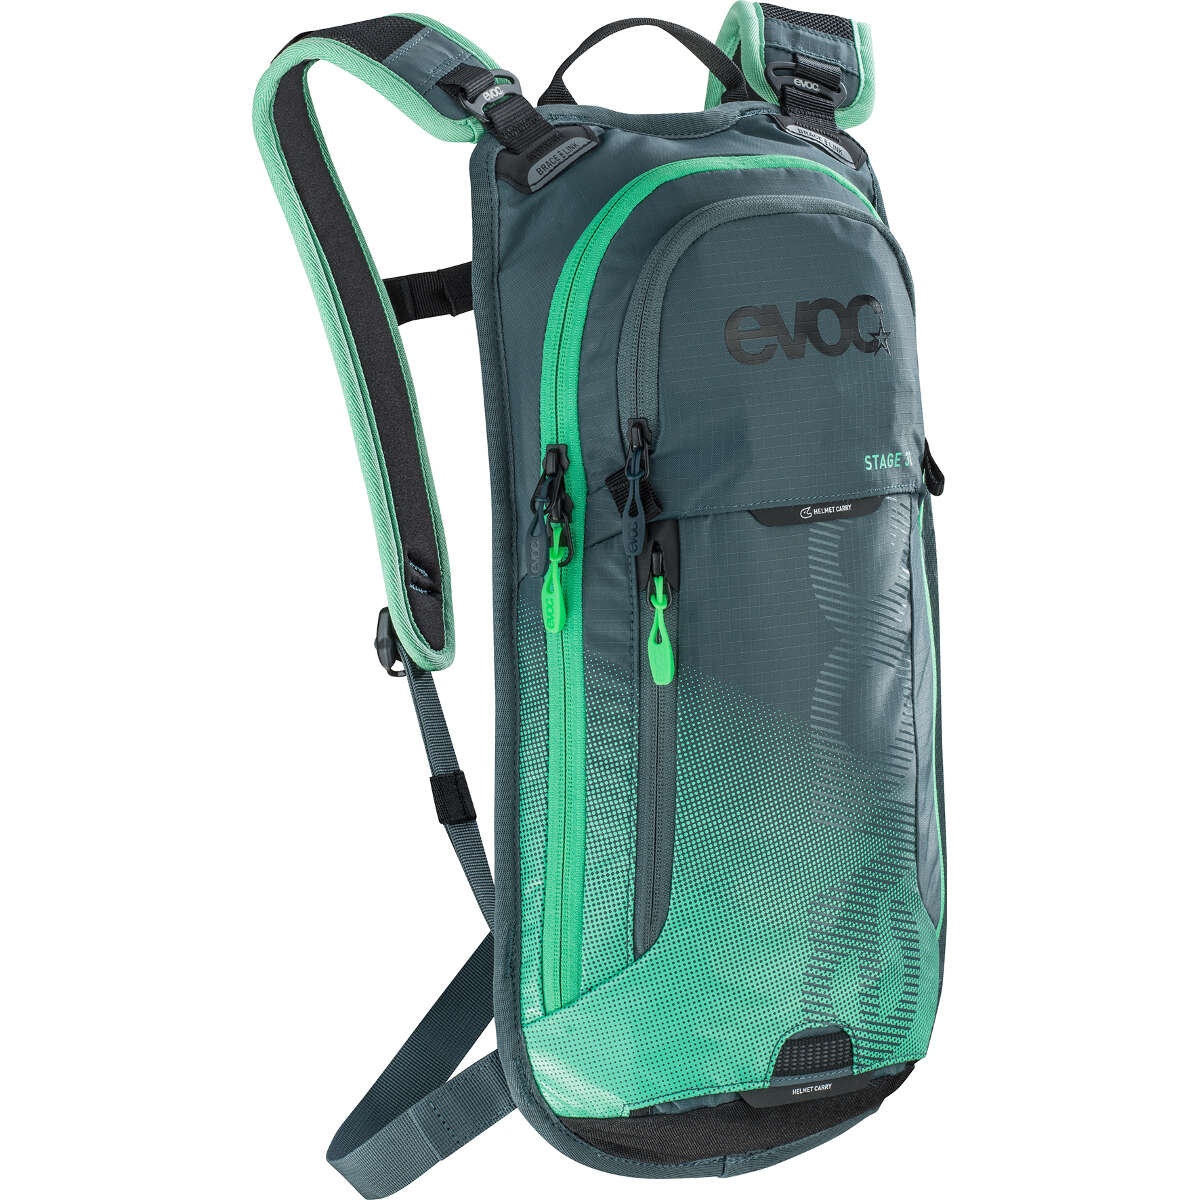 Evoc Backpack with Hydration System Compartment Stage Slate/Neon Green, 3 Liter